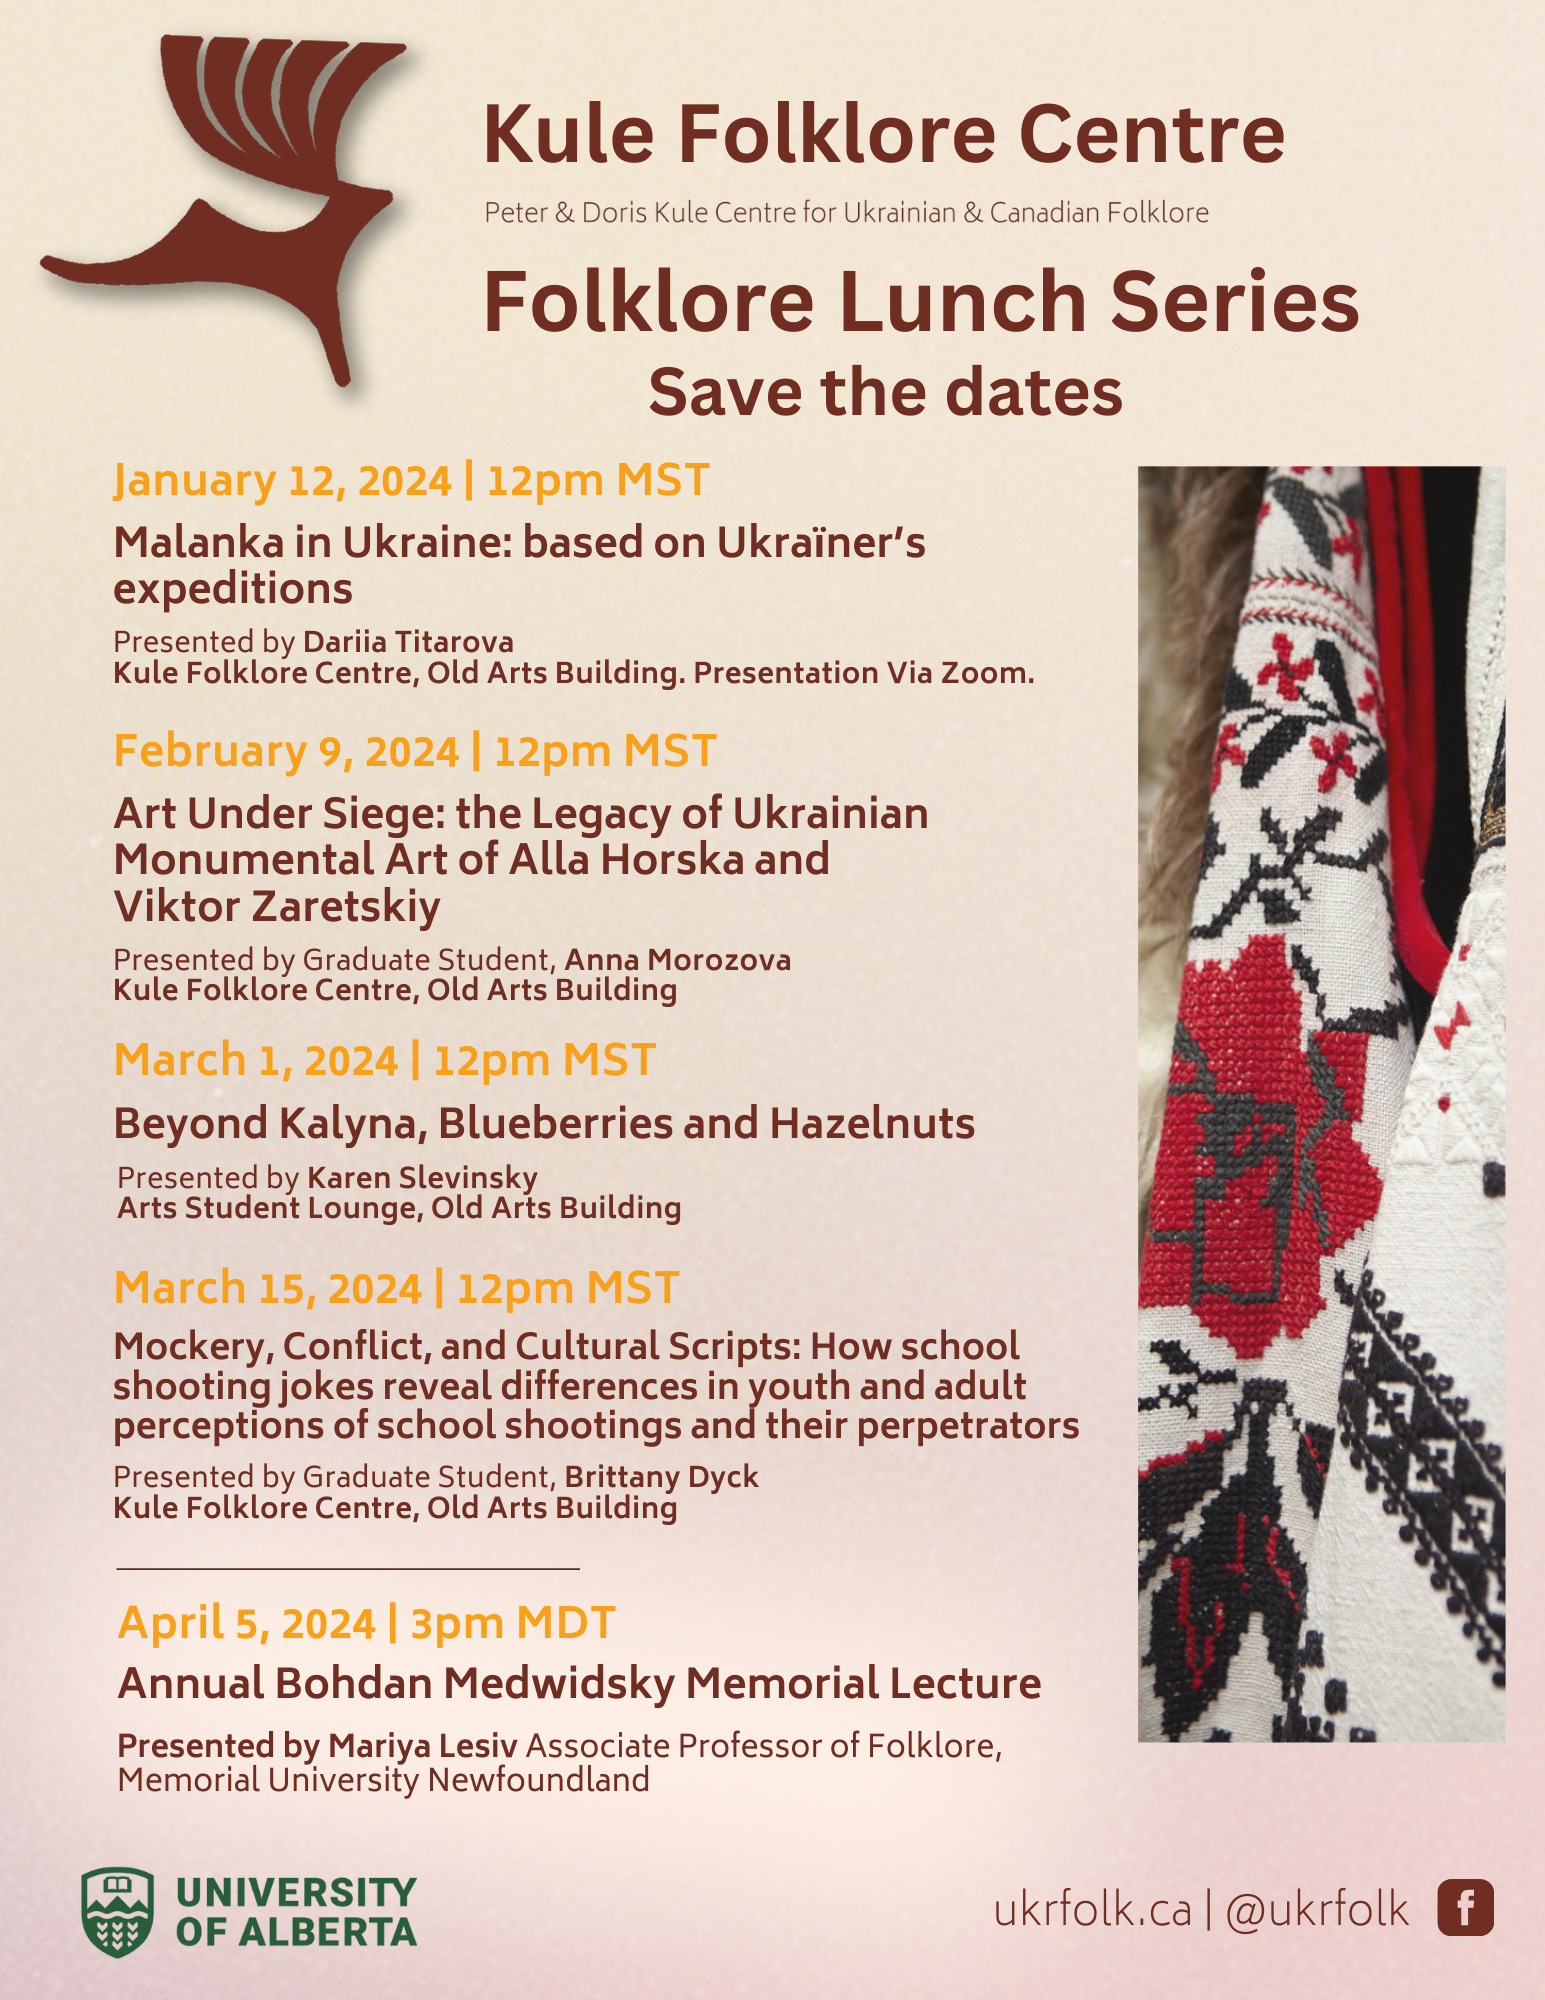 kule-folklore-centre-folklore-lunch-series-fall-2023-16.png